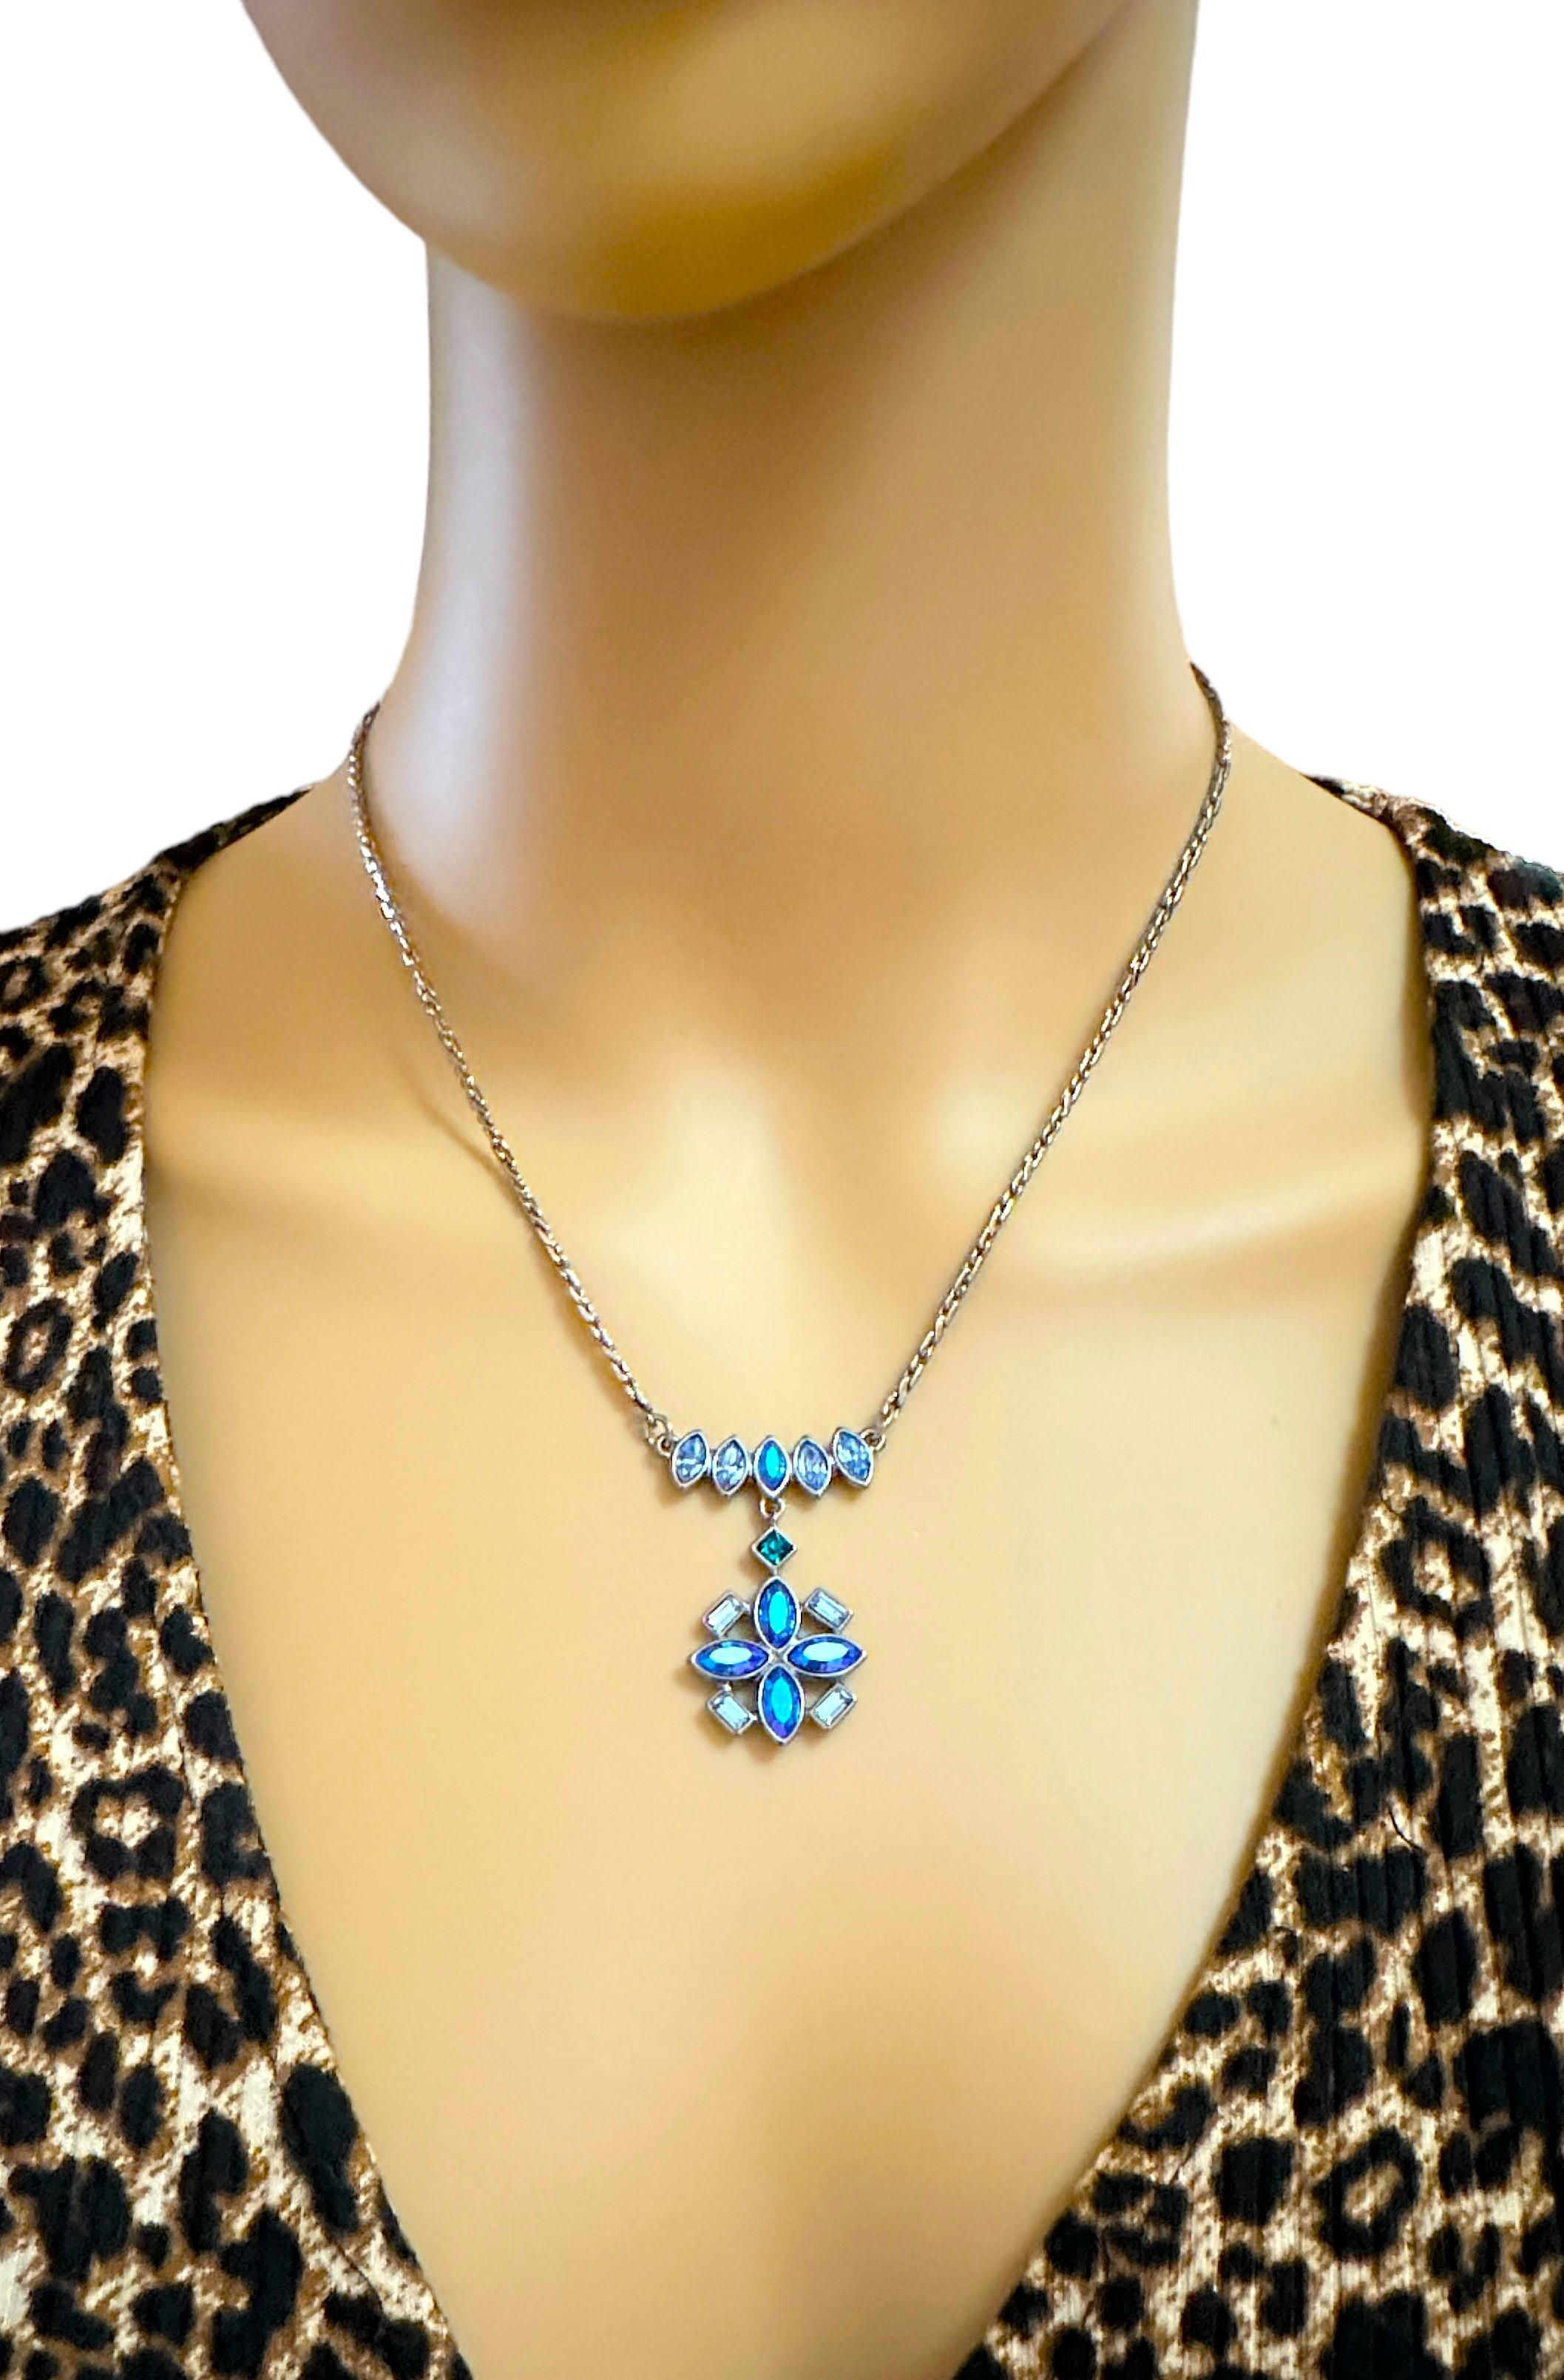 Vintage Givenchy Multi-Color Blue Stone Necklace with Gun Metal Chain Mint In Excellent Condition For Sale In Eagan, MN